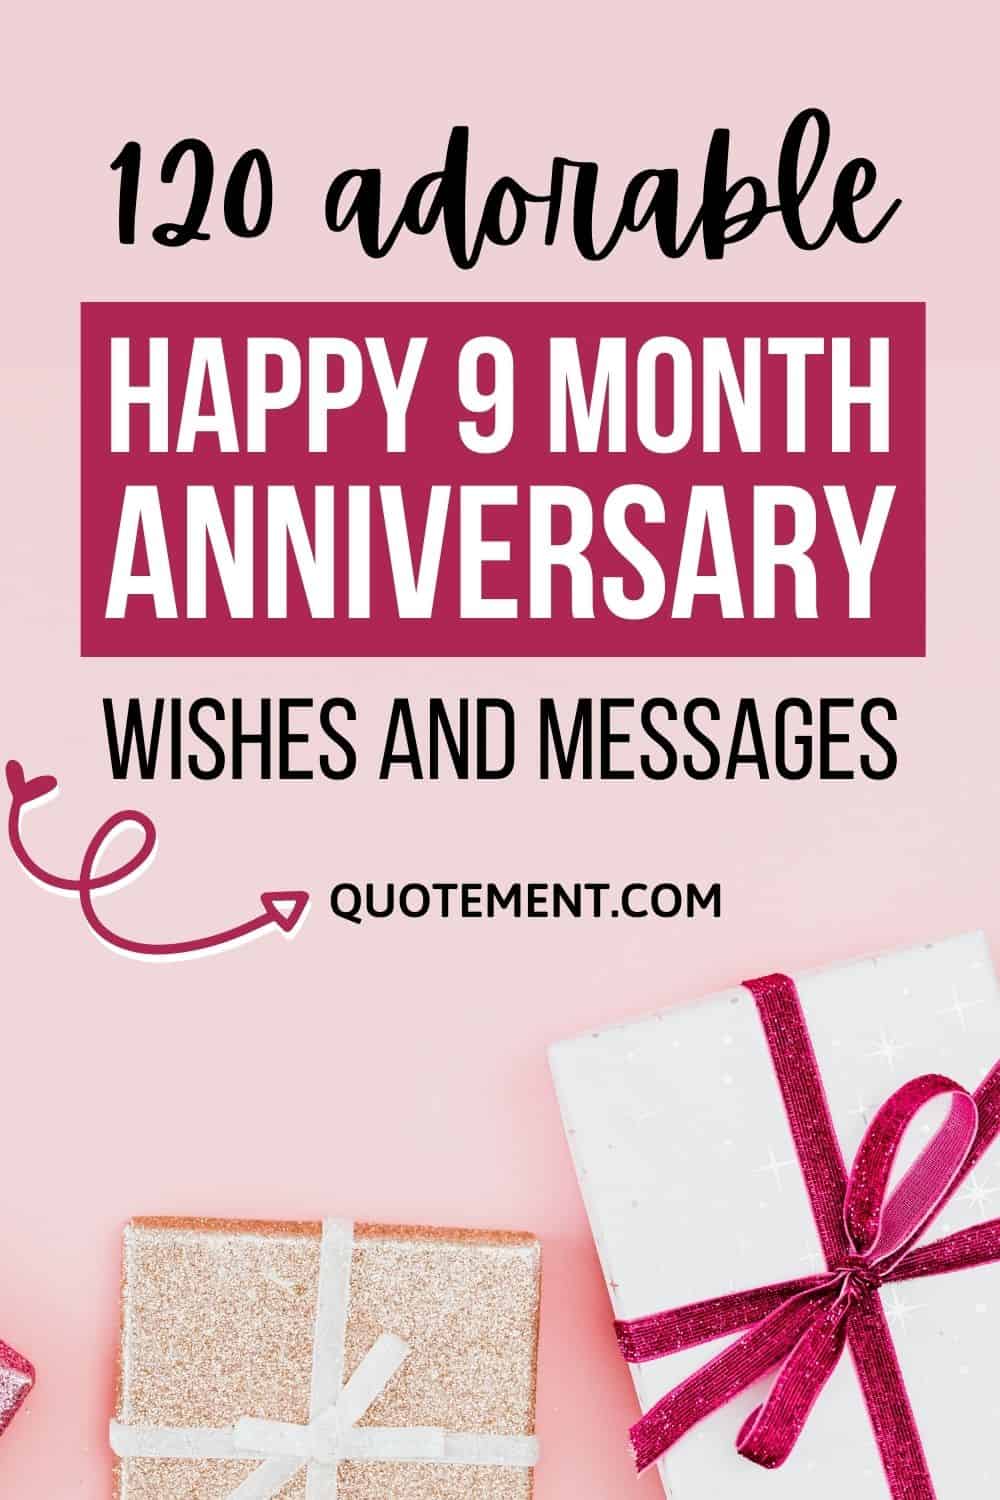 120 Adorable Happy 9 Month Anniversary Wishes And Messages pinterest